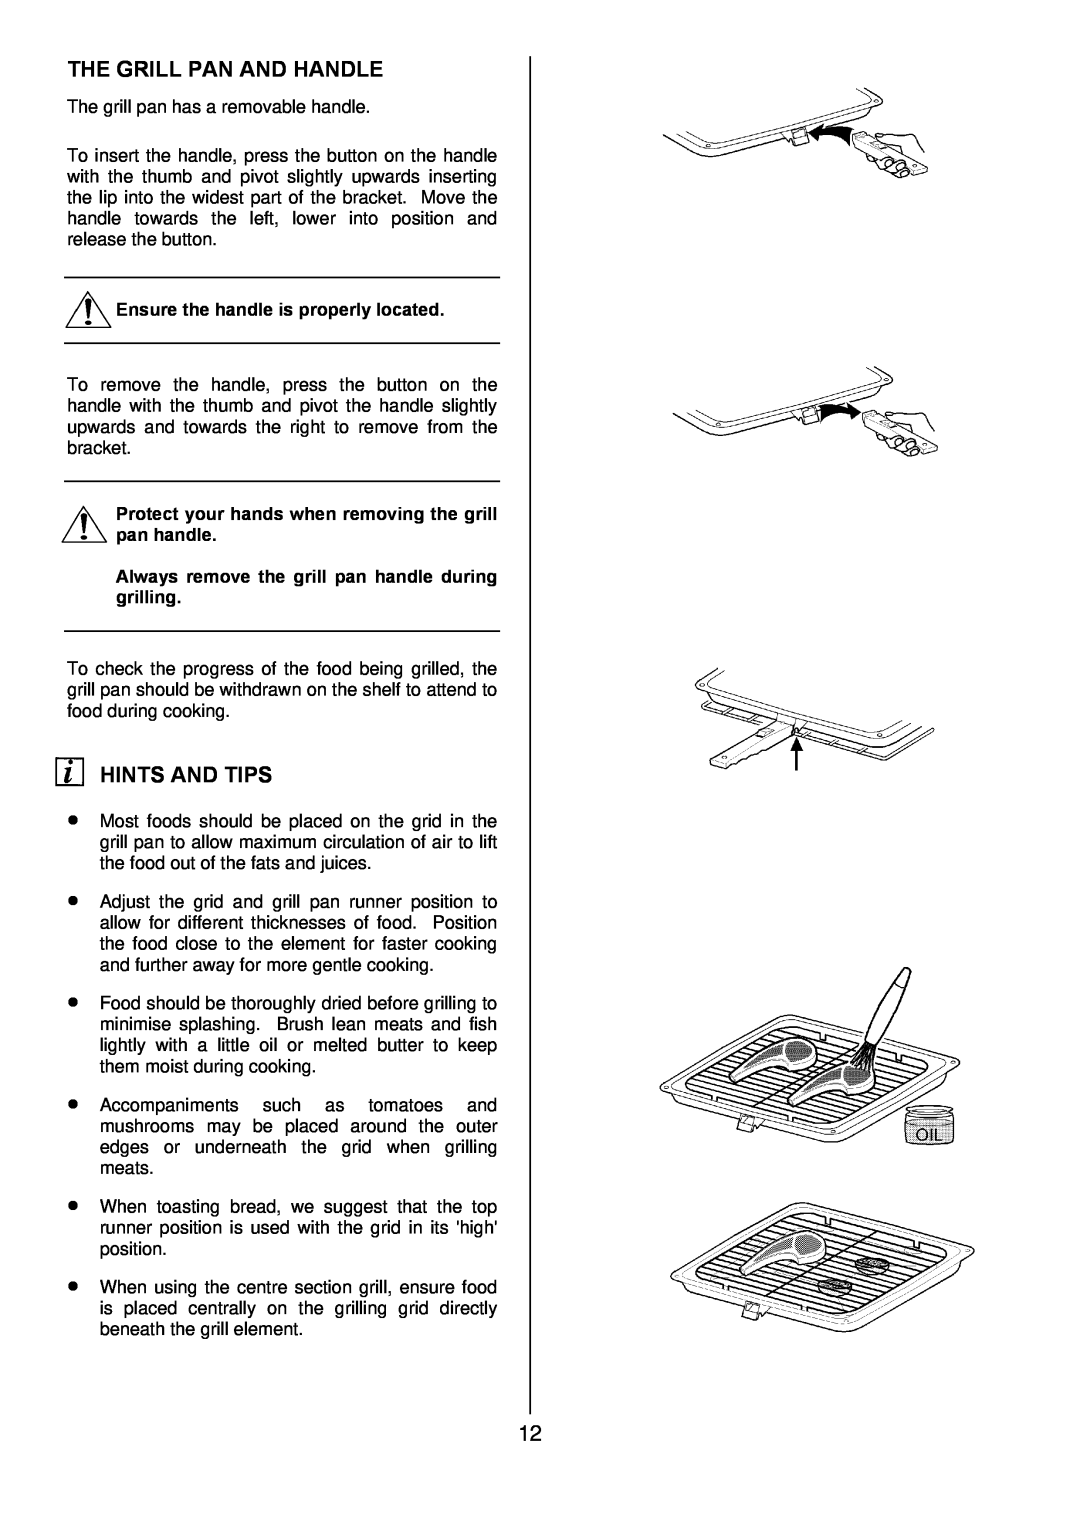 Zanussi ZDF 290 manual The Grill Pan And Handle, Hints And Tips, Ensure the handle is properly located 